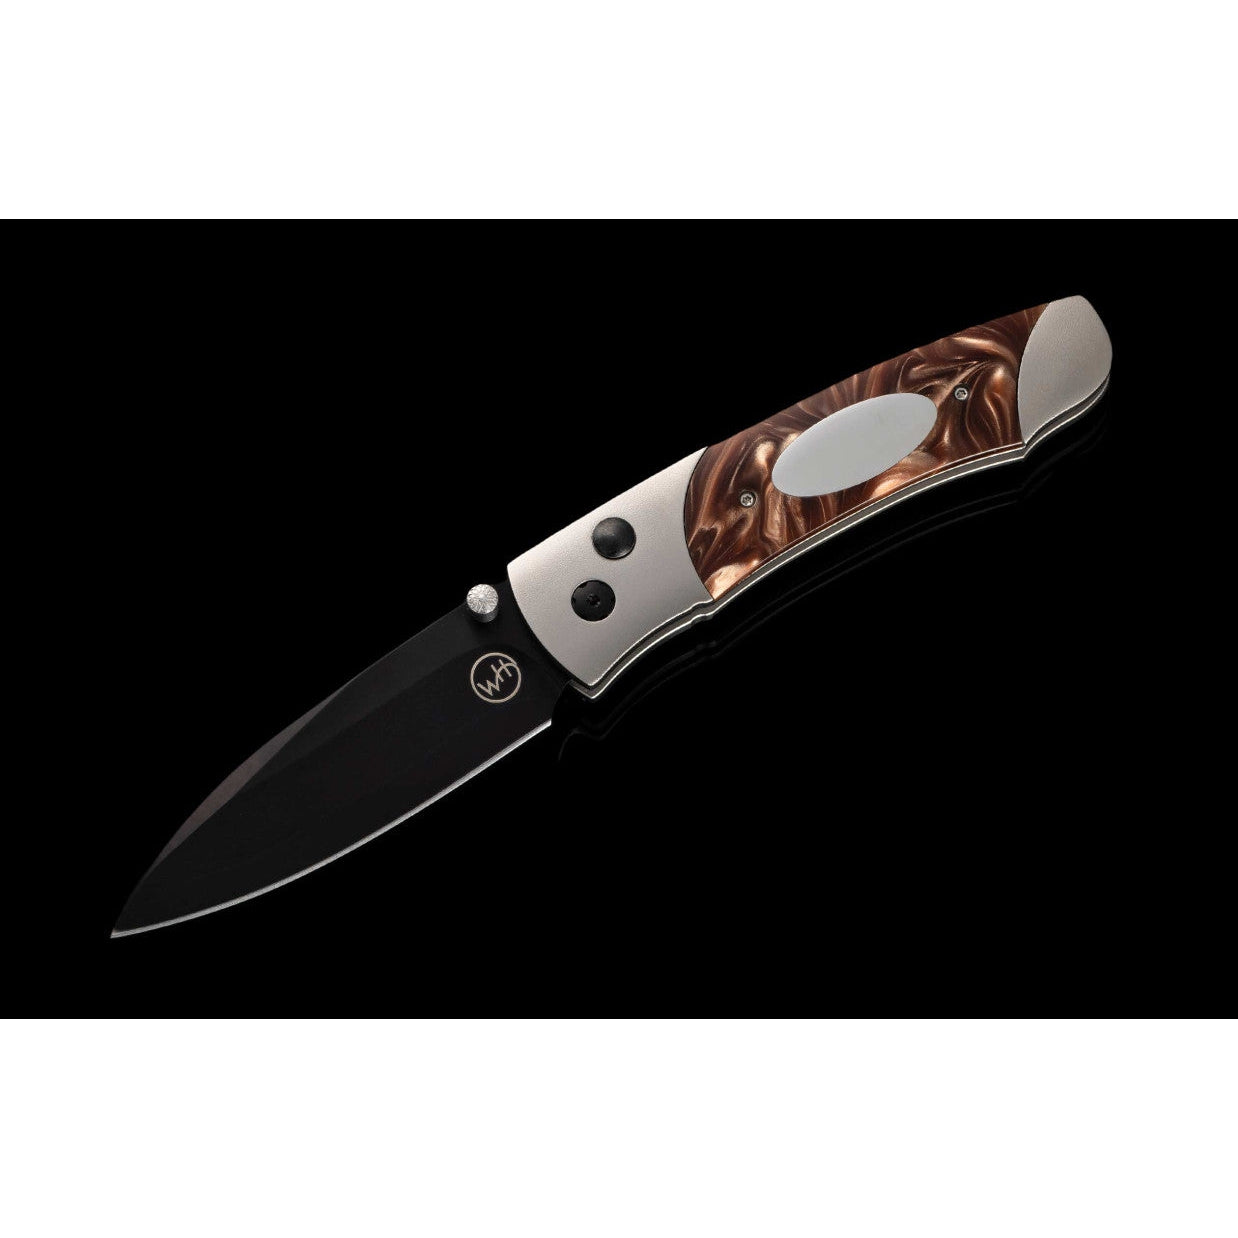 William Henry A200-3B Knife-Knives & Tools-Kevin's Fine Outdoor Gear & Apparel